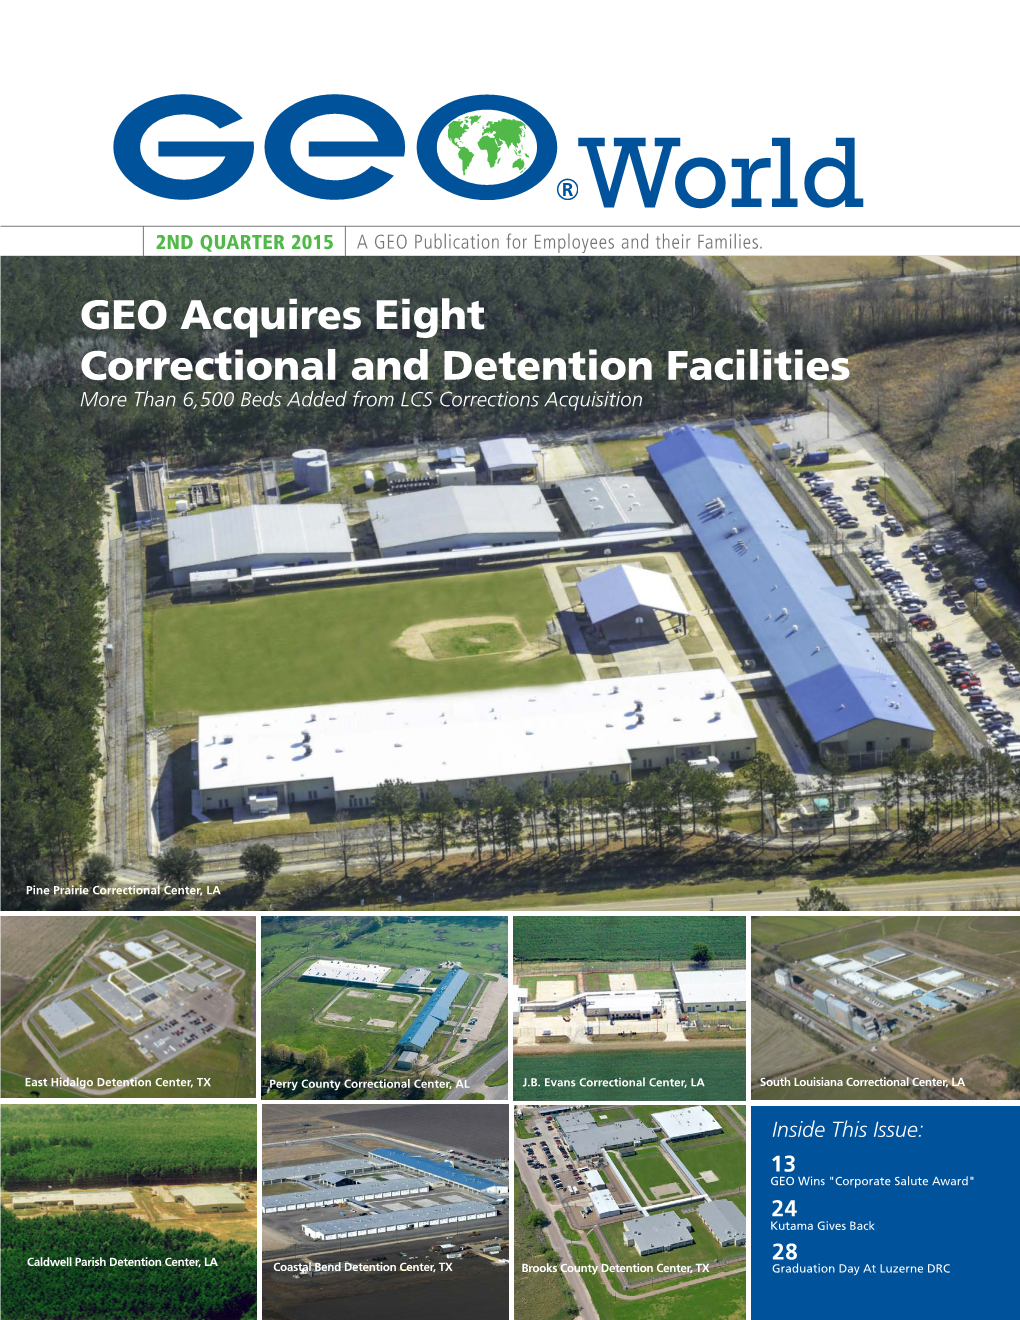 GEO Acquires Eight Correctional and Detention Facilities More Than 6,500 Beds Added from LCS Corrections Acquisition